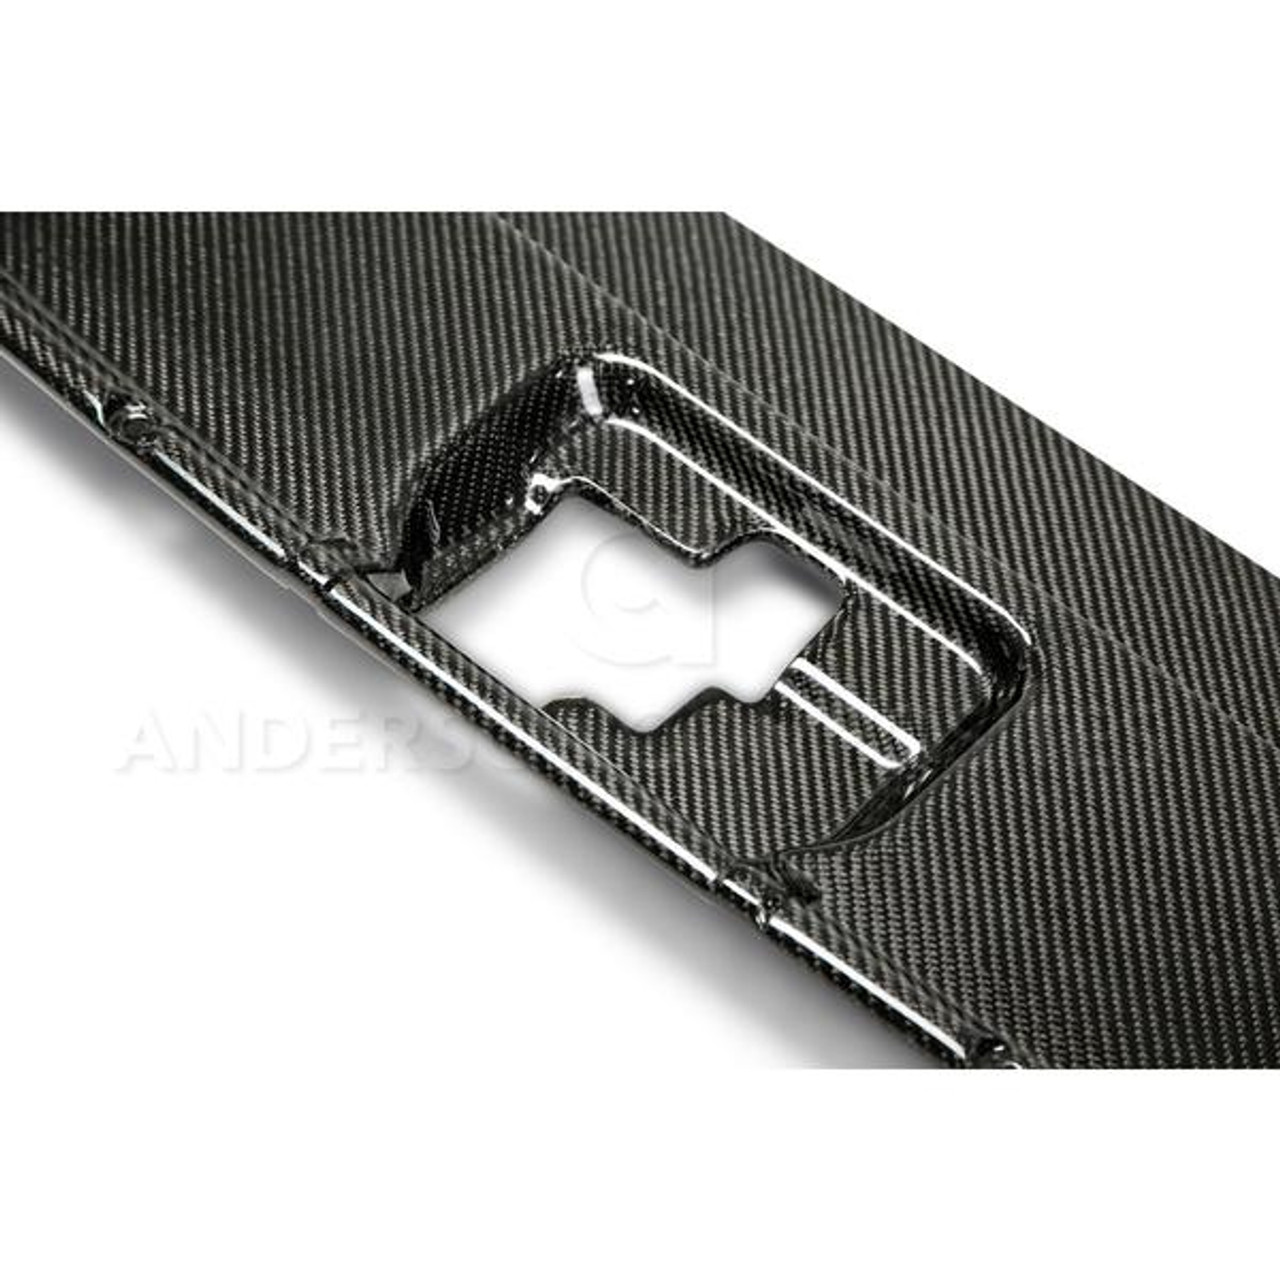 Anderson Composites 2015 - 2017 Mustang Carbon Fiber Radiator Cover